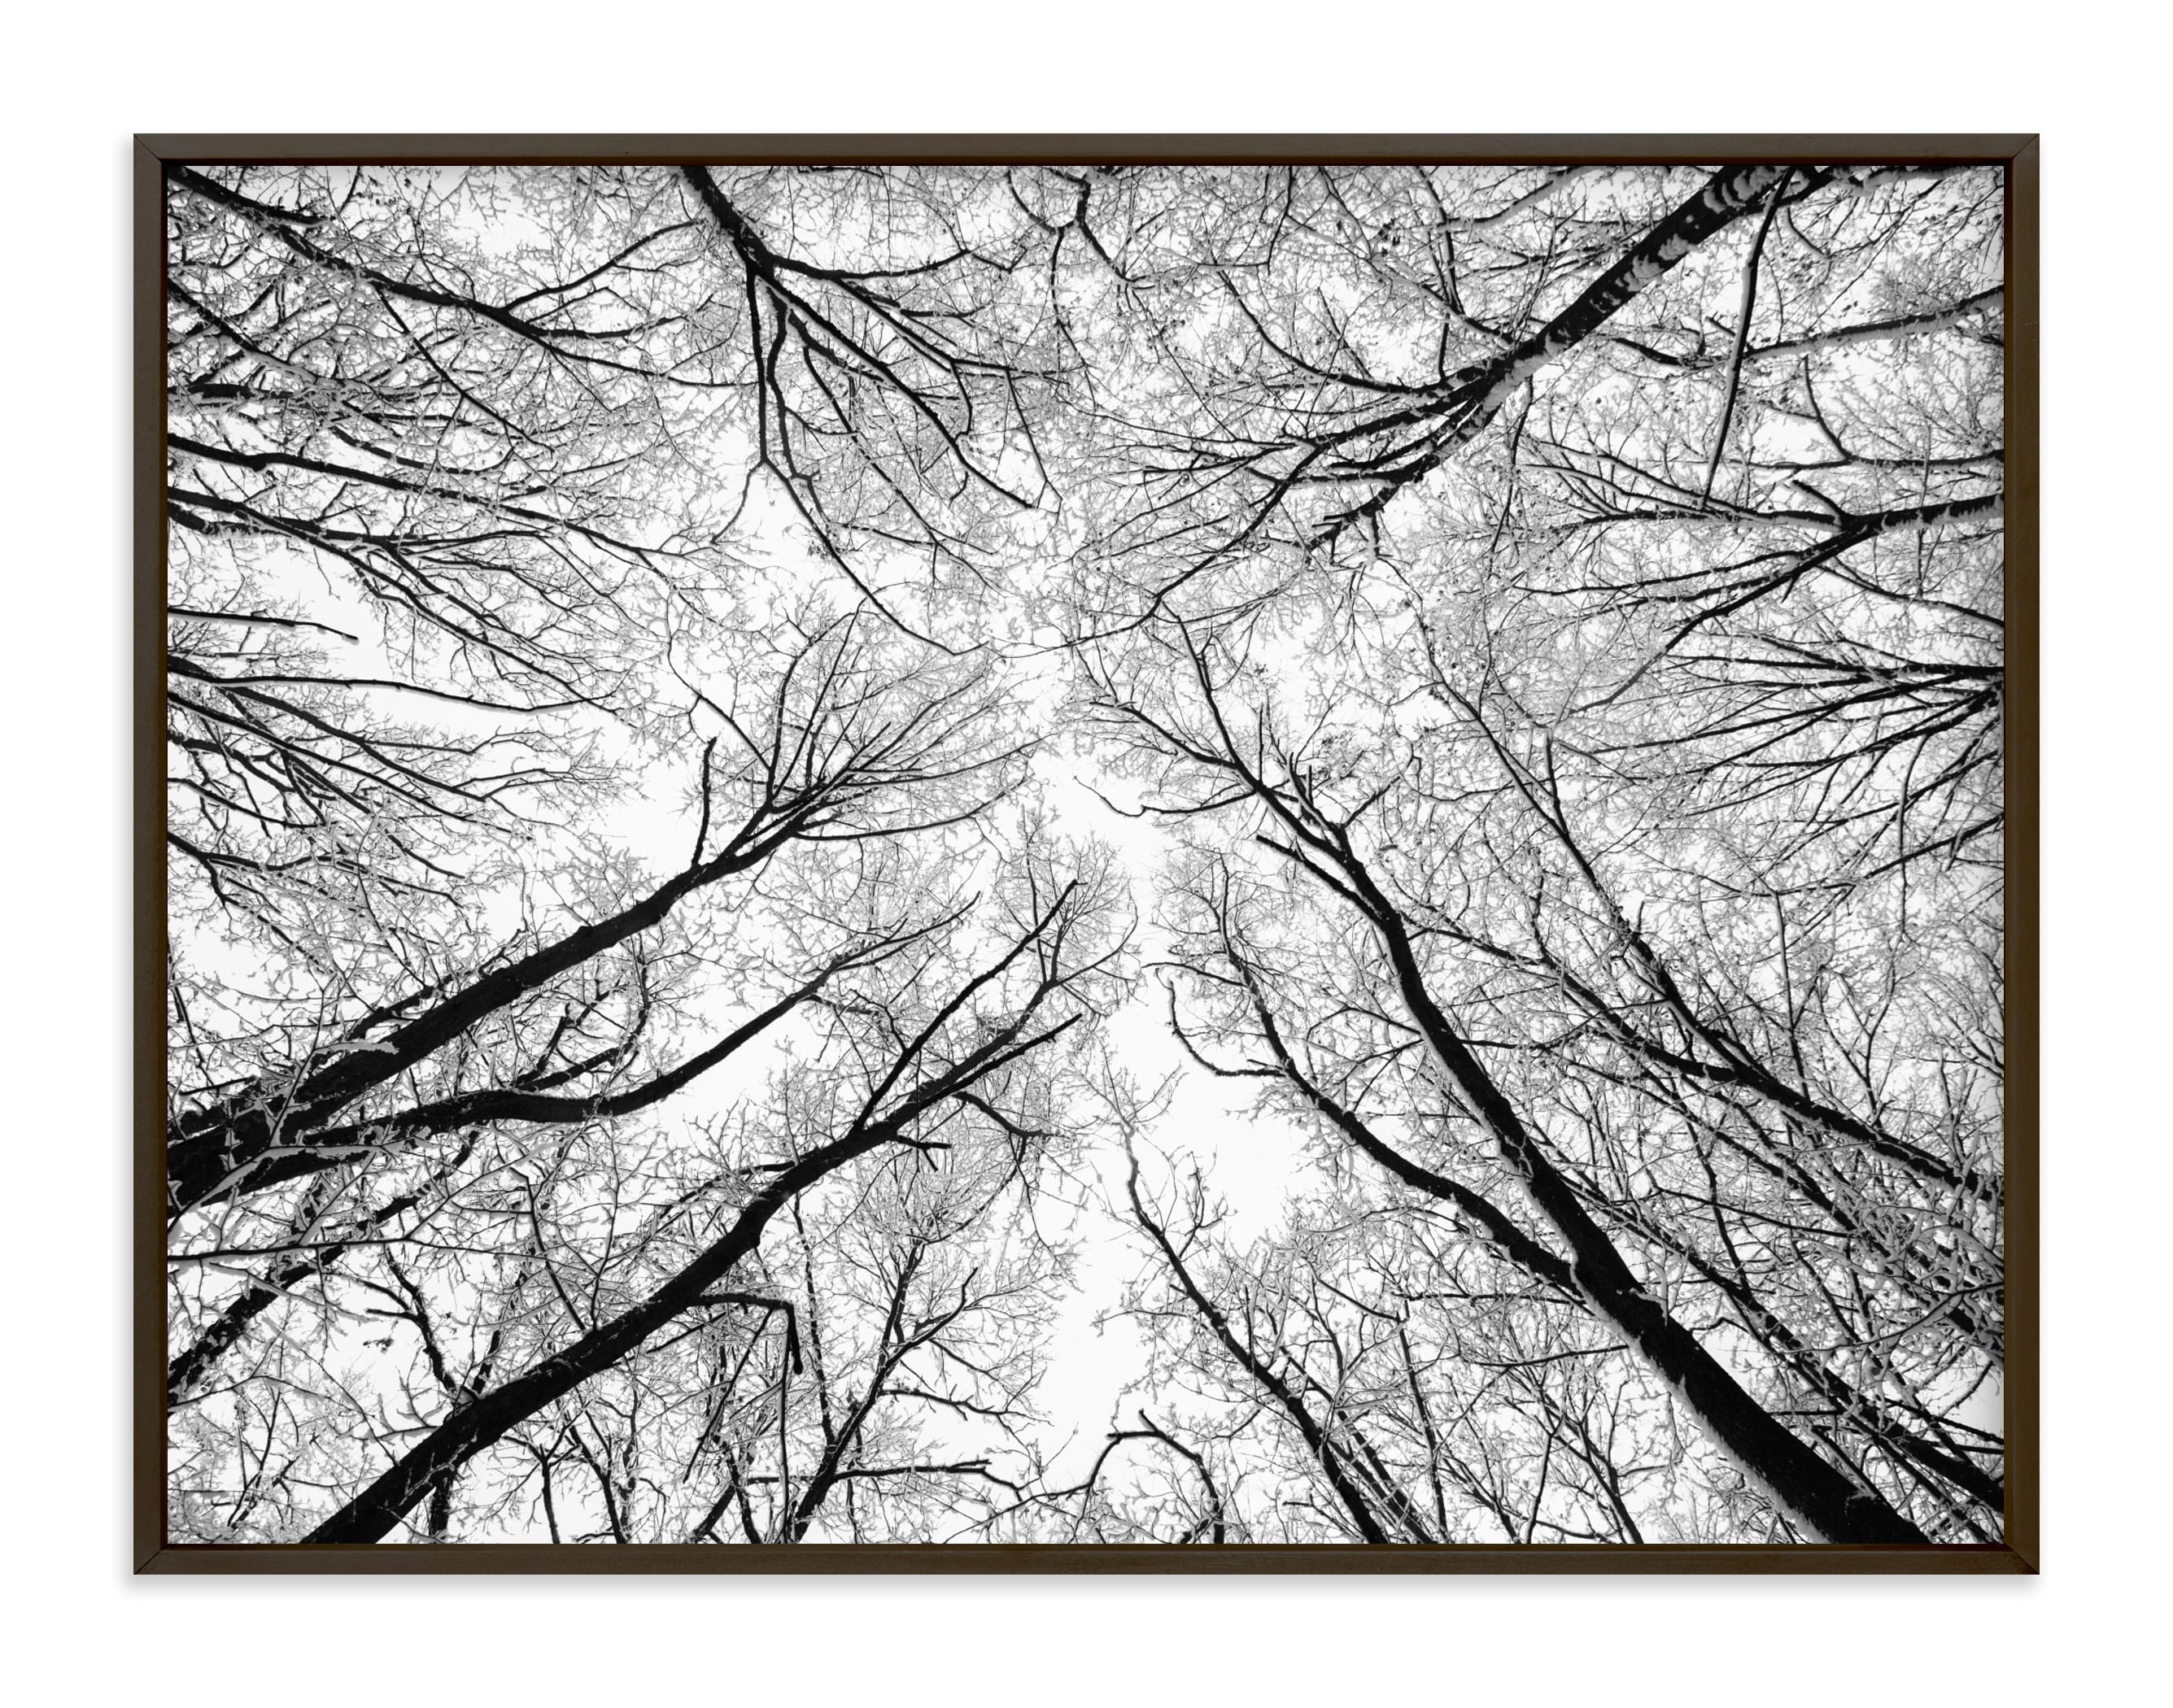 Lost In The Forest Art Print - Image 0